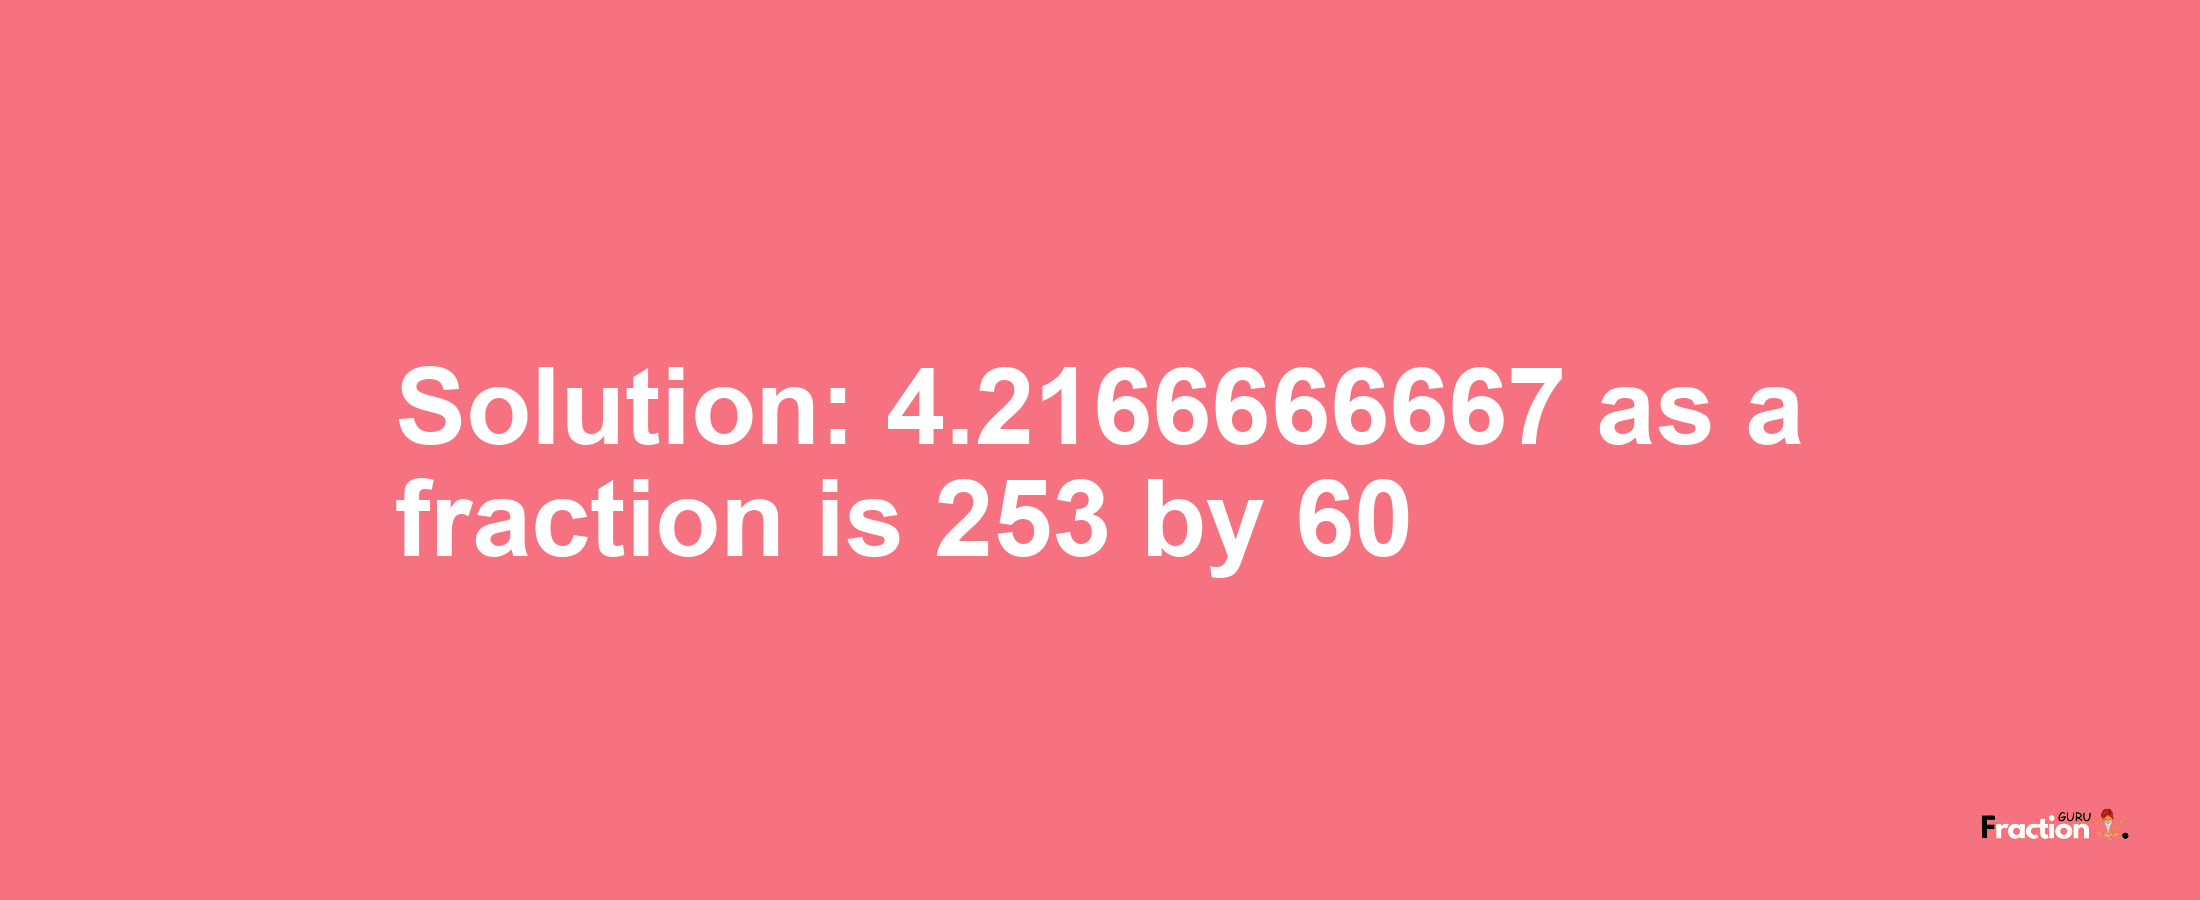 Solution:4.2166666667 as a fraction is 253/60